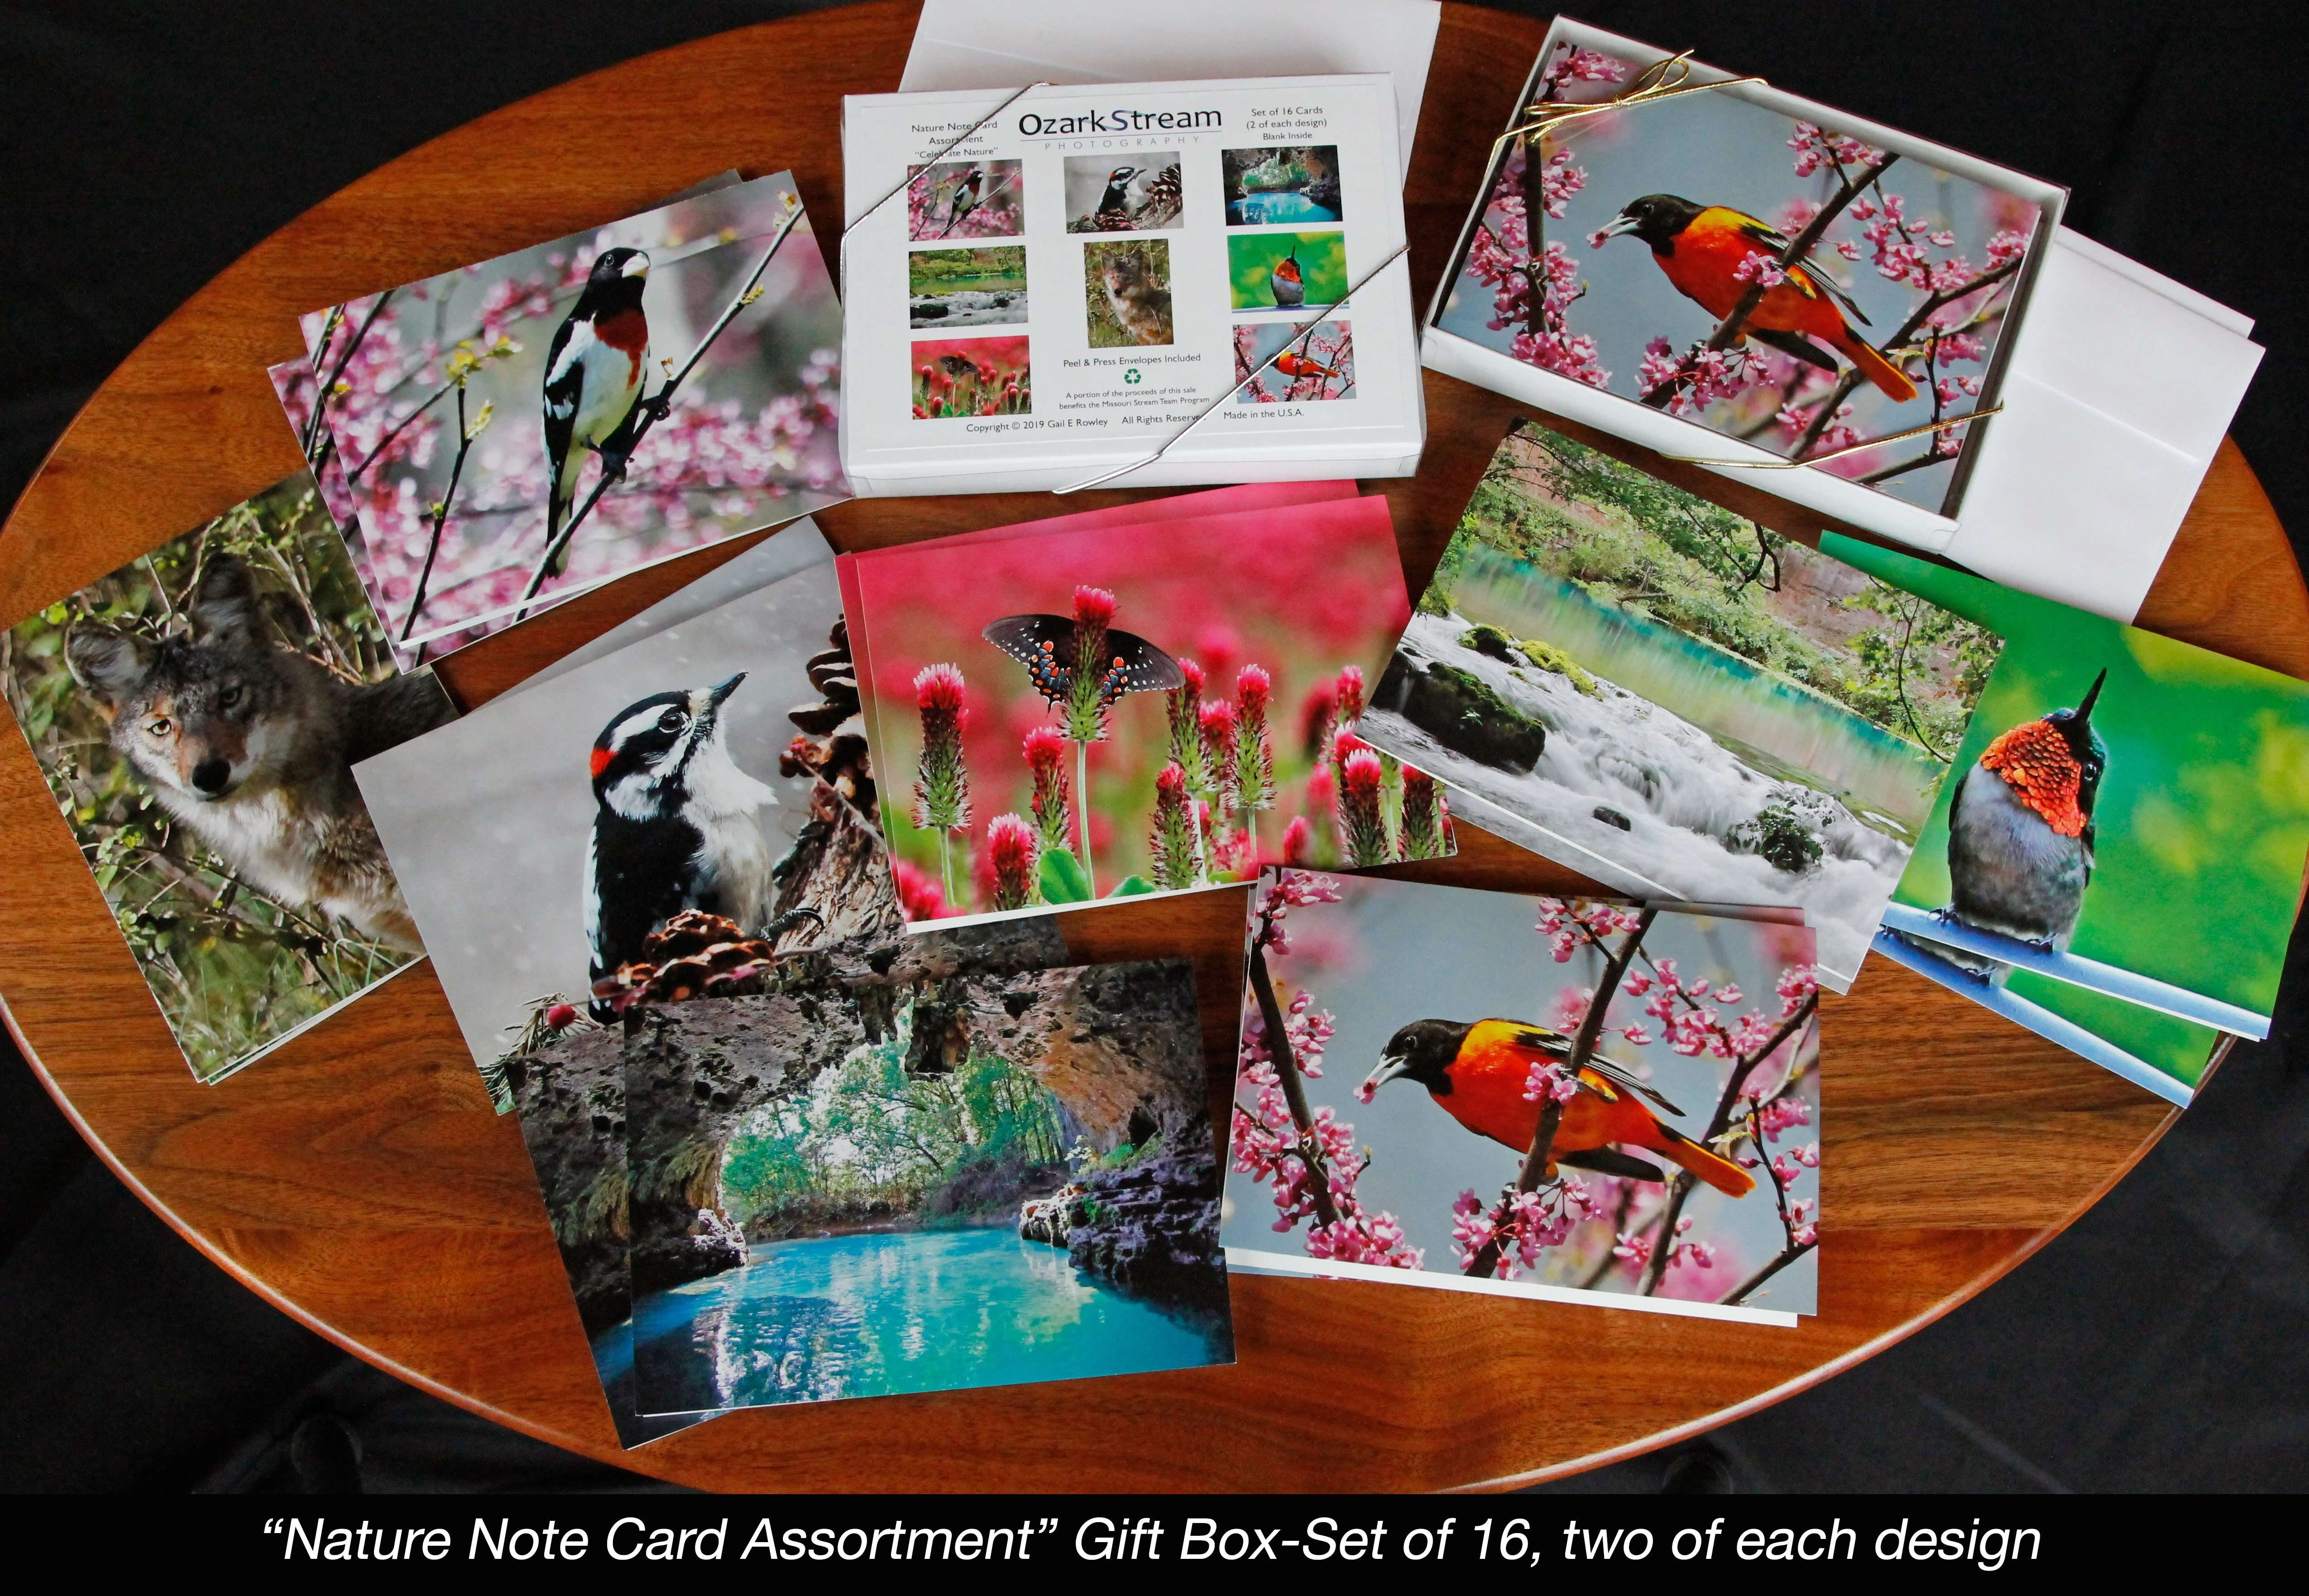 Nature Note Card Assortment Celebrate Nature by Gail e Rowley Ozark Stream Photography